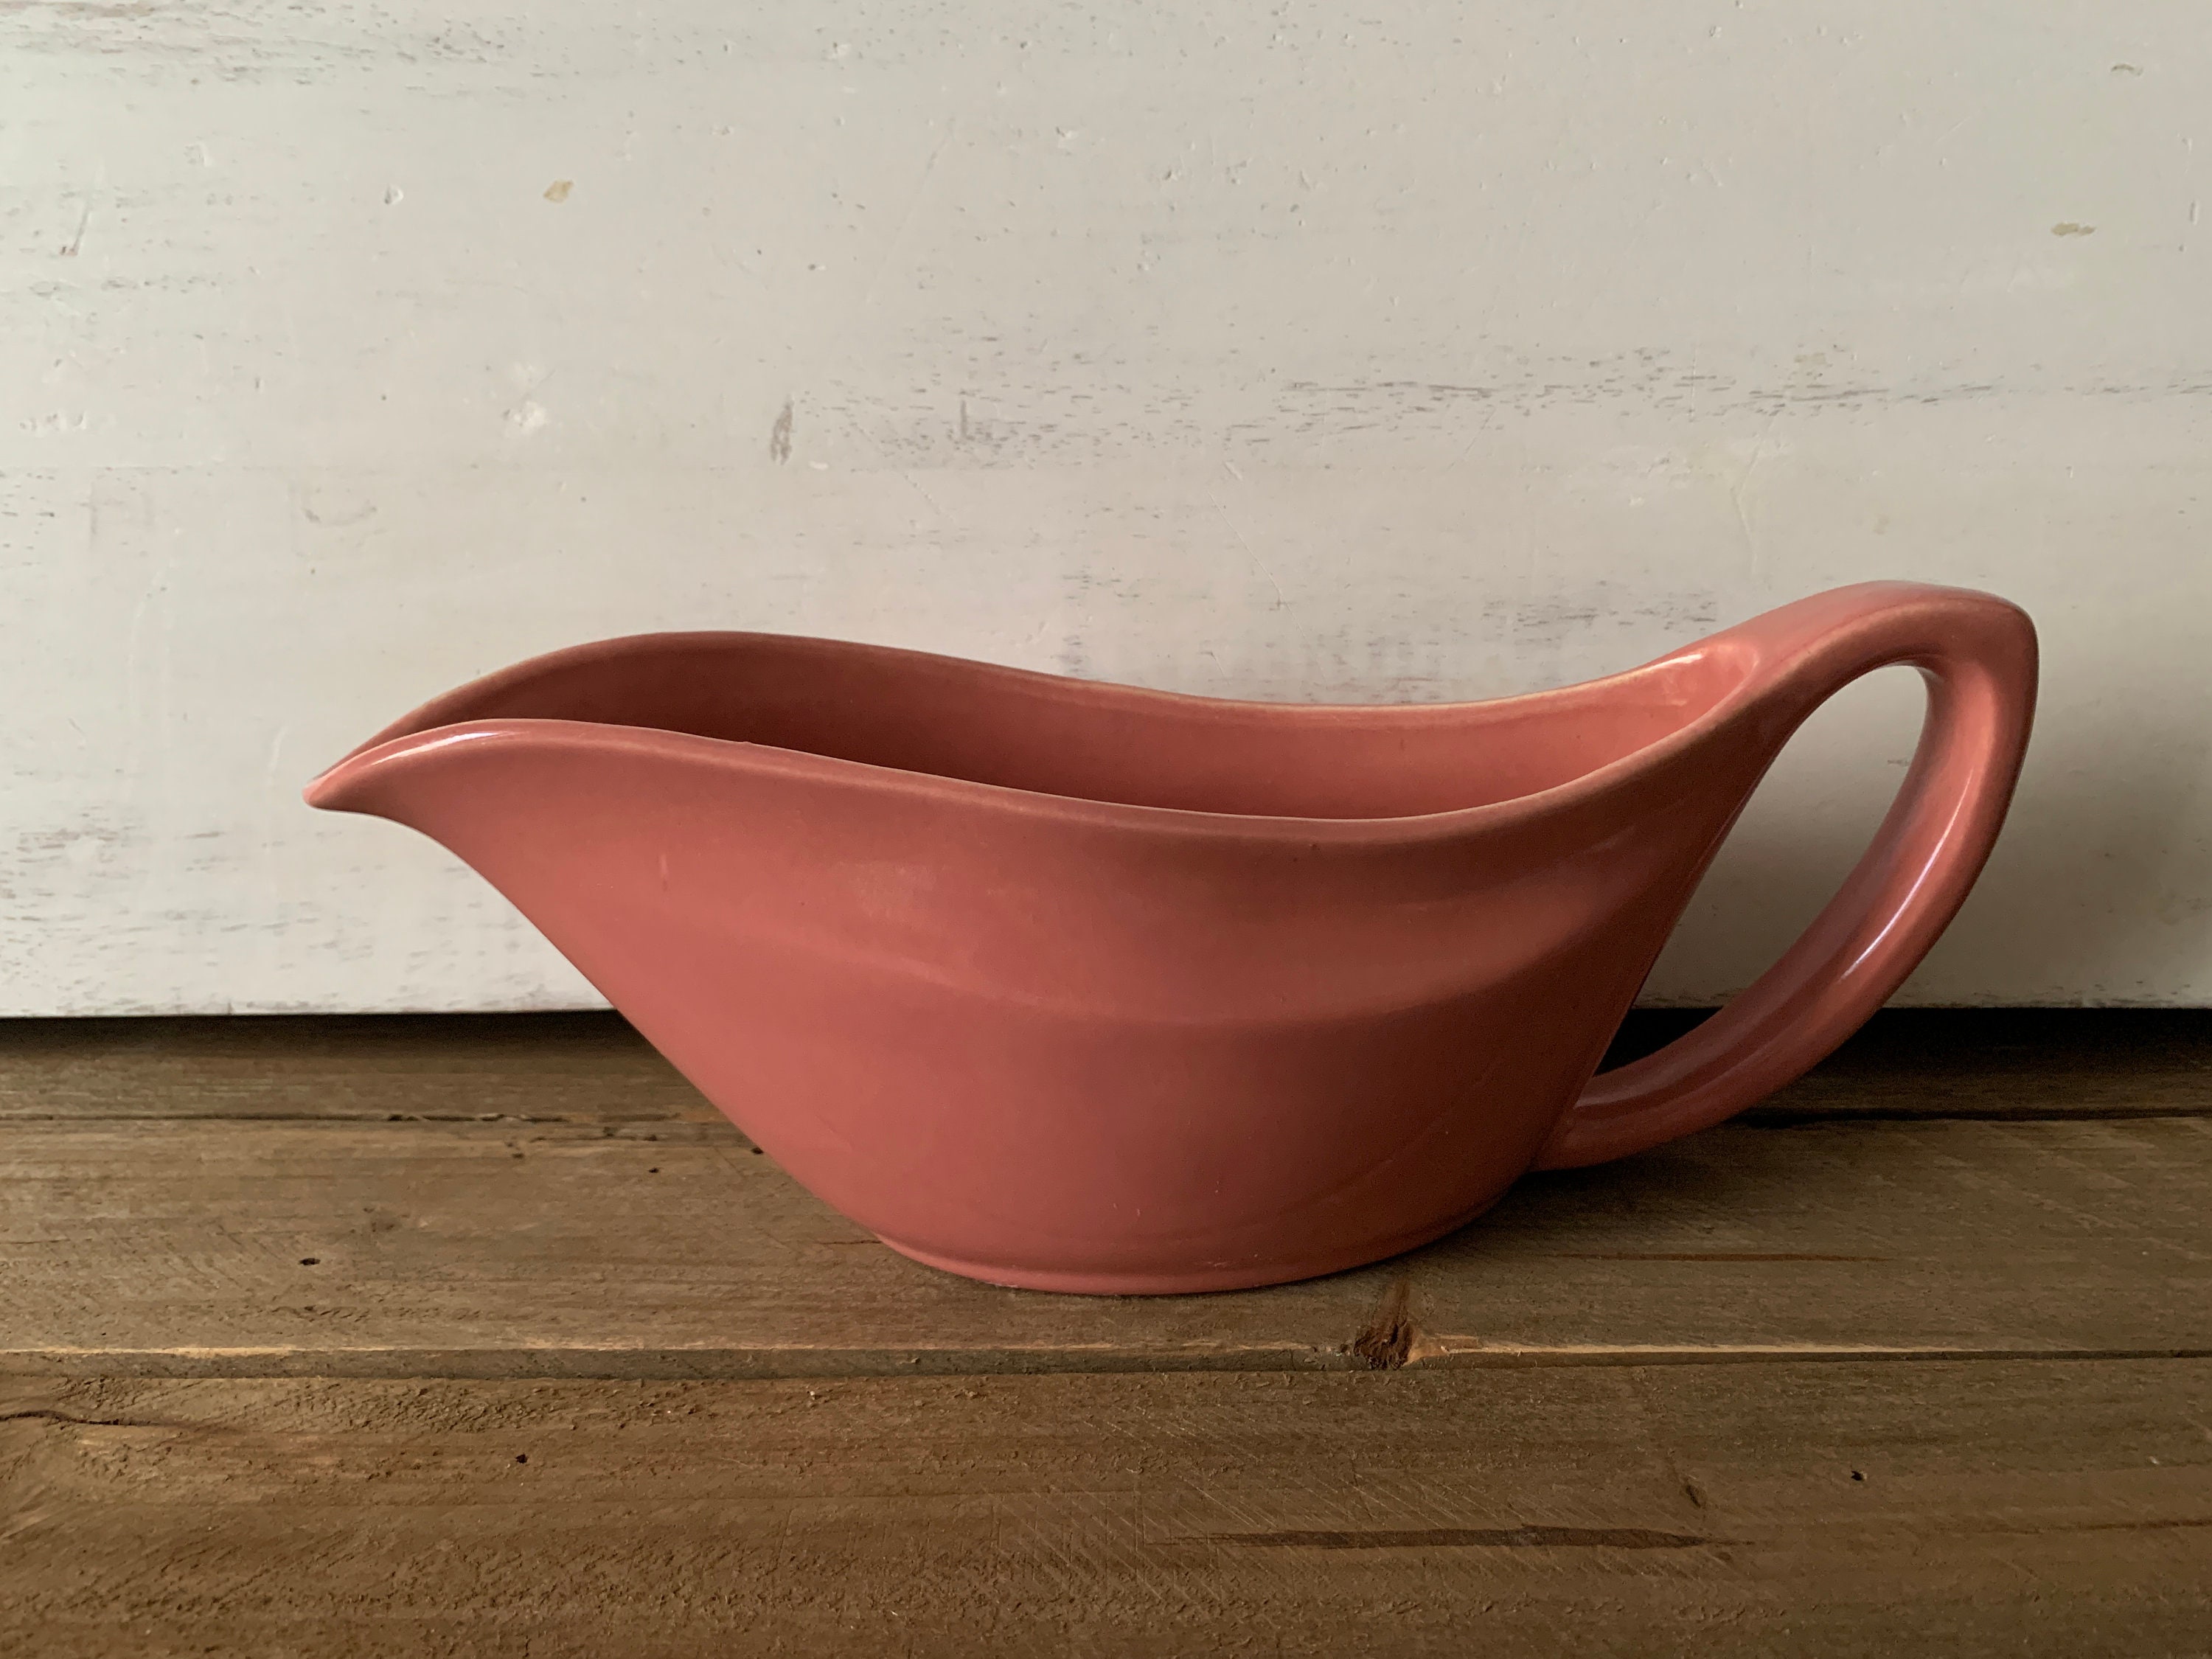 Bauer Pottery Russel Wright American Modern Gravy Boat & Saucer, 3 Colors  on Food52